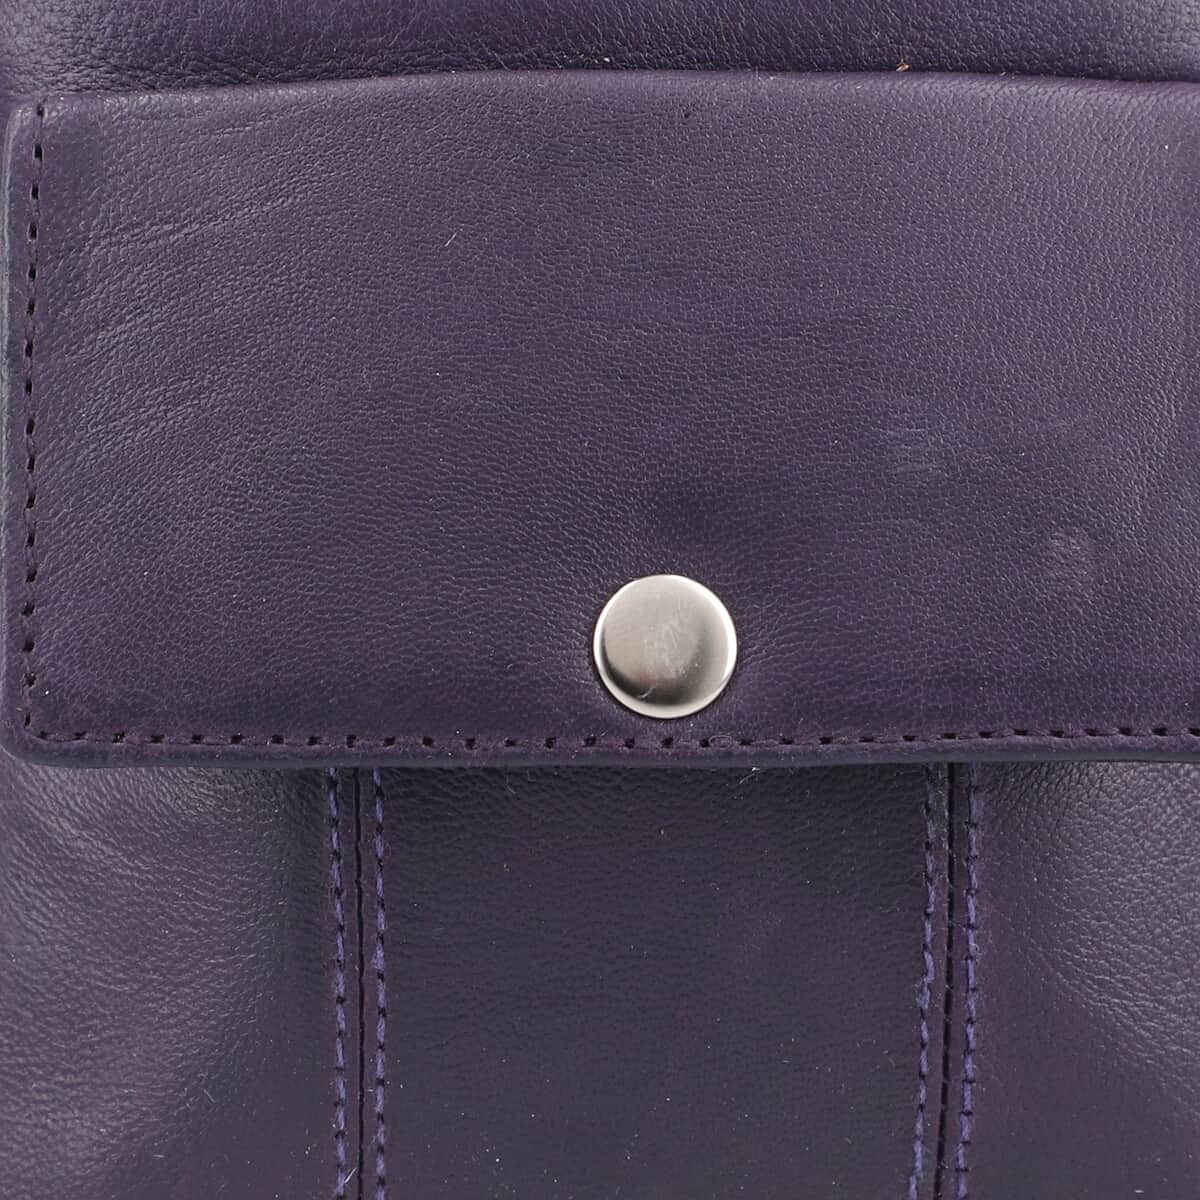 Newage Purple 100% Genuine Leather Crossbody Bag with Man-made Straps image number 5